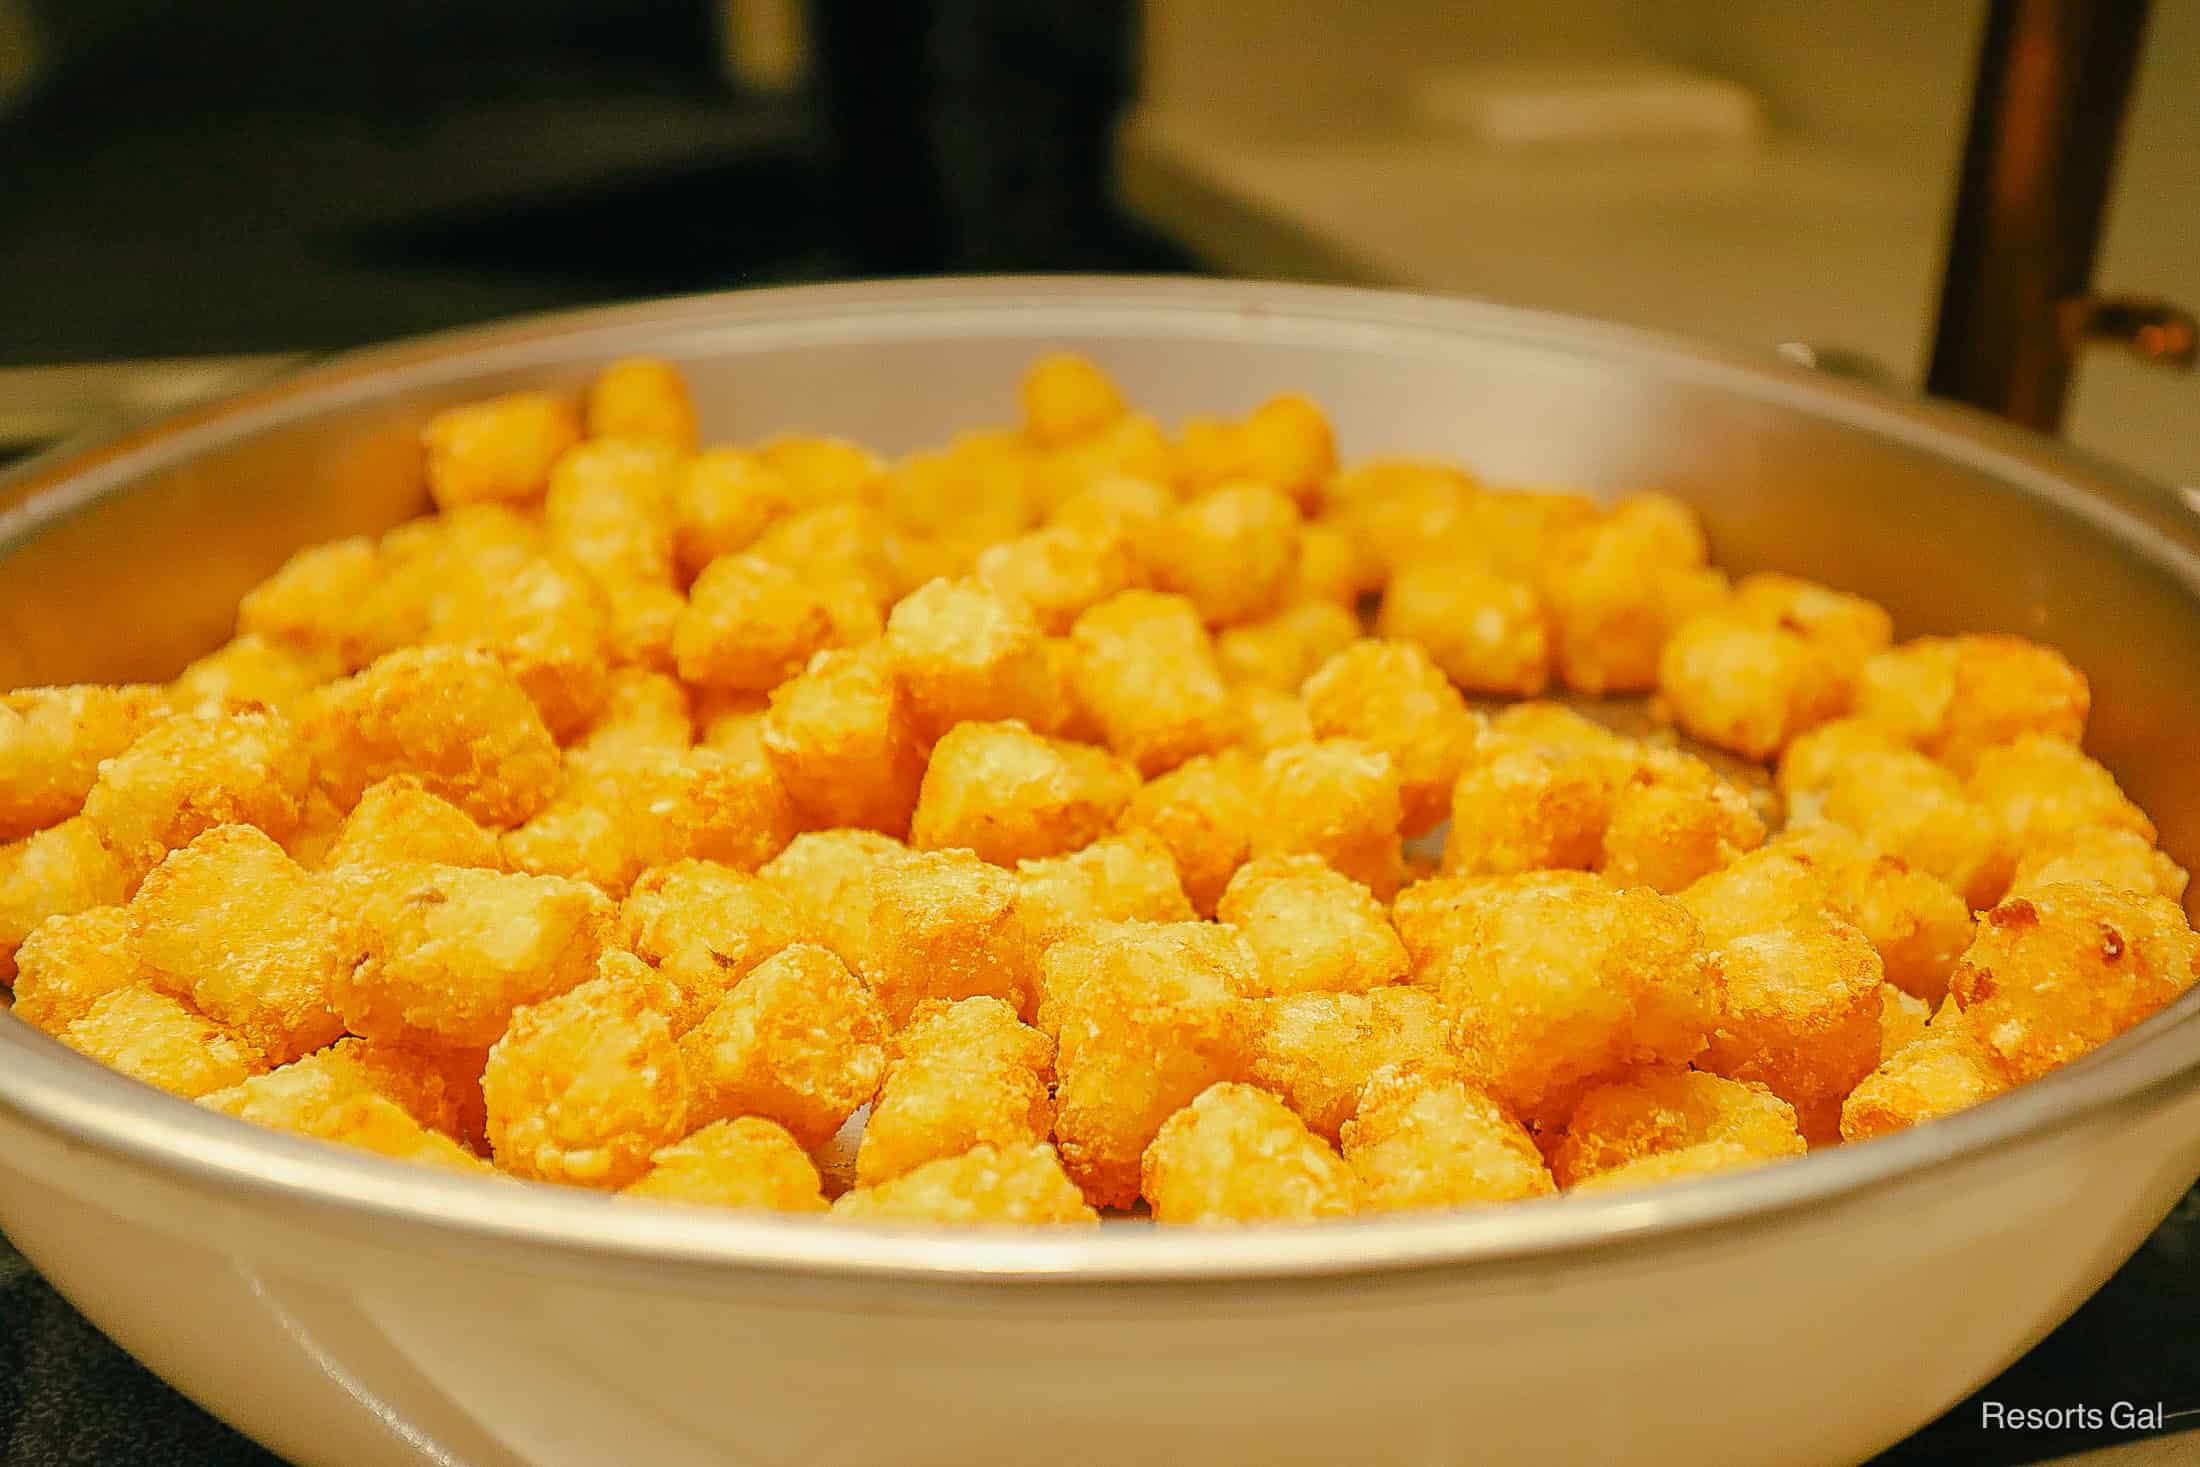 tater tots on the buffet at breakfast 1900 Park Fare 